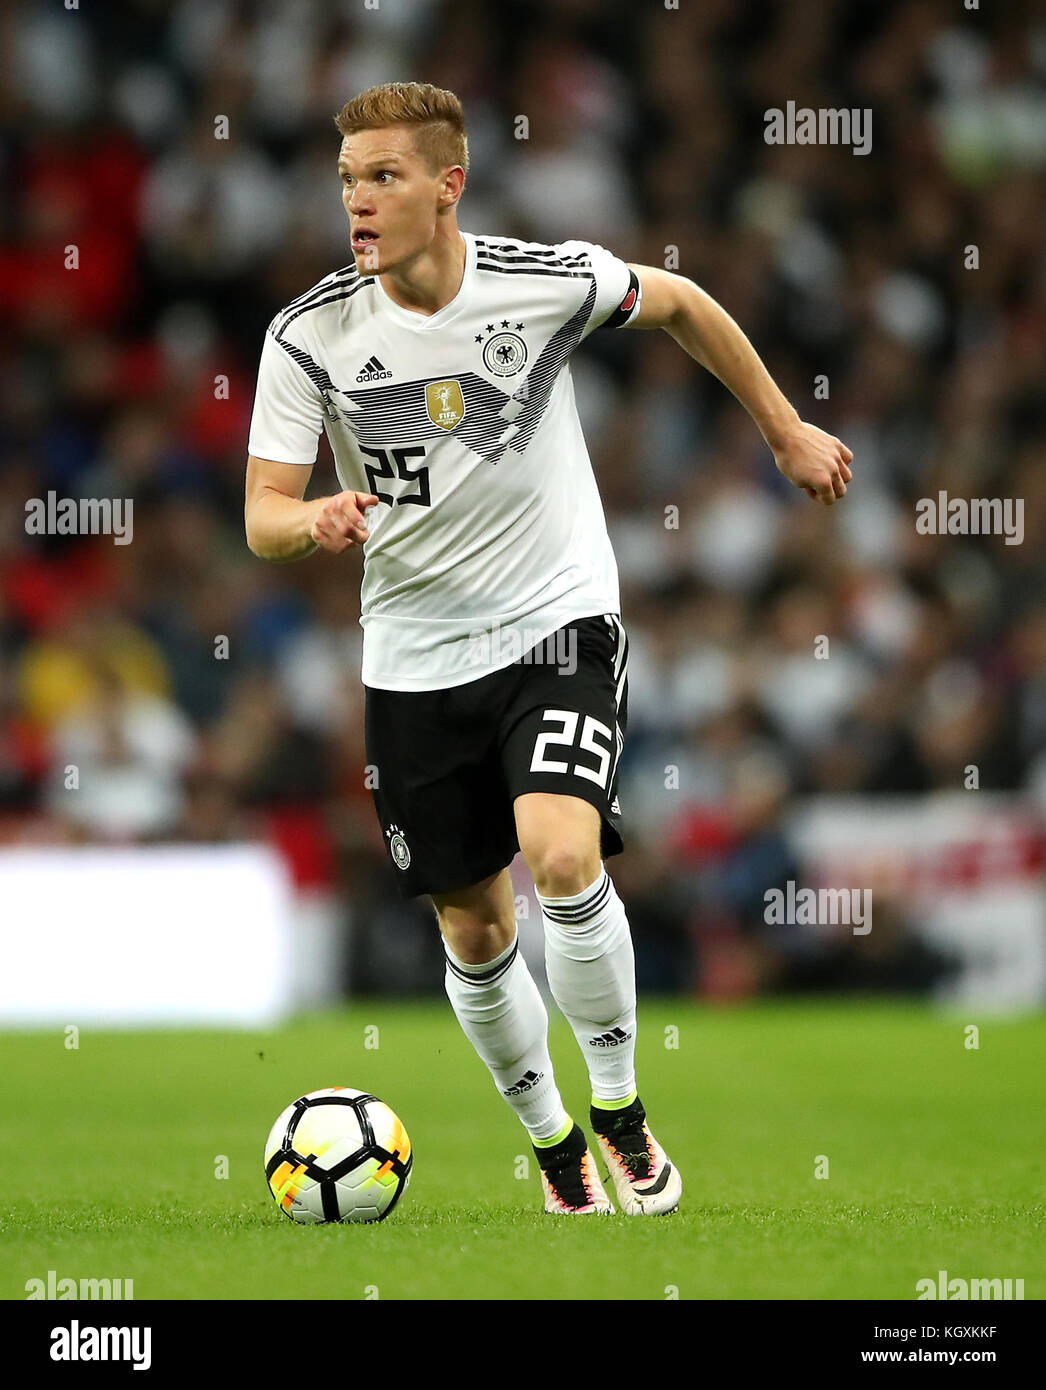 Germany's Marcel Halstenberg during the International Friendly match at Wembley Stadium, London. PRESS ASSOCIATION Photo. Picture date: Friday November 10, 2017. See PA story SOCCER England. Photo credit should read: Nick Potts/PA Wire. Stock Photo